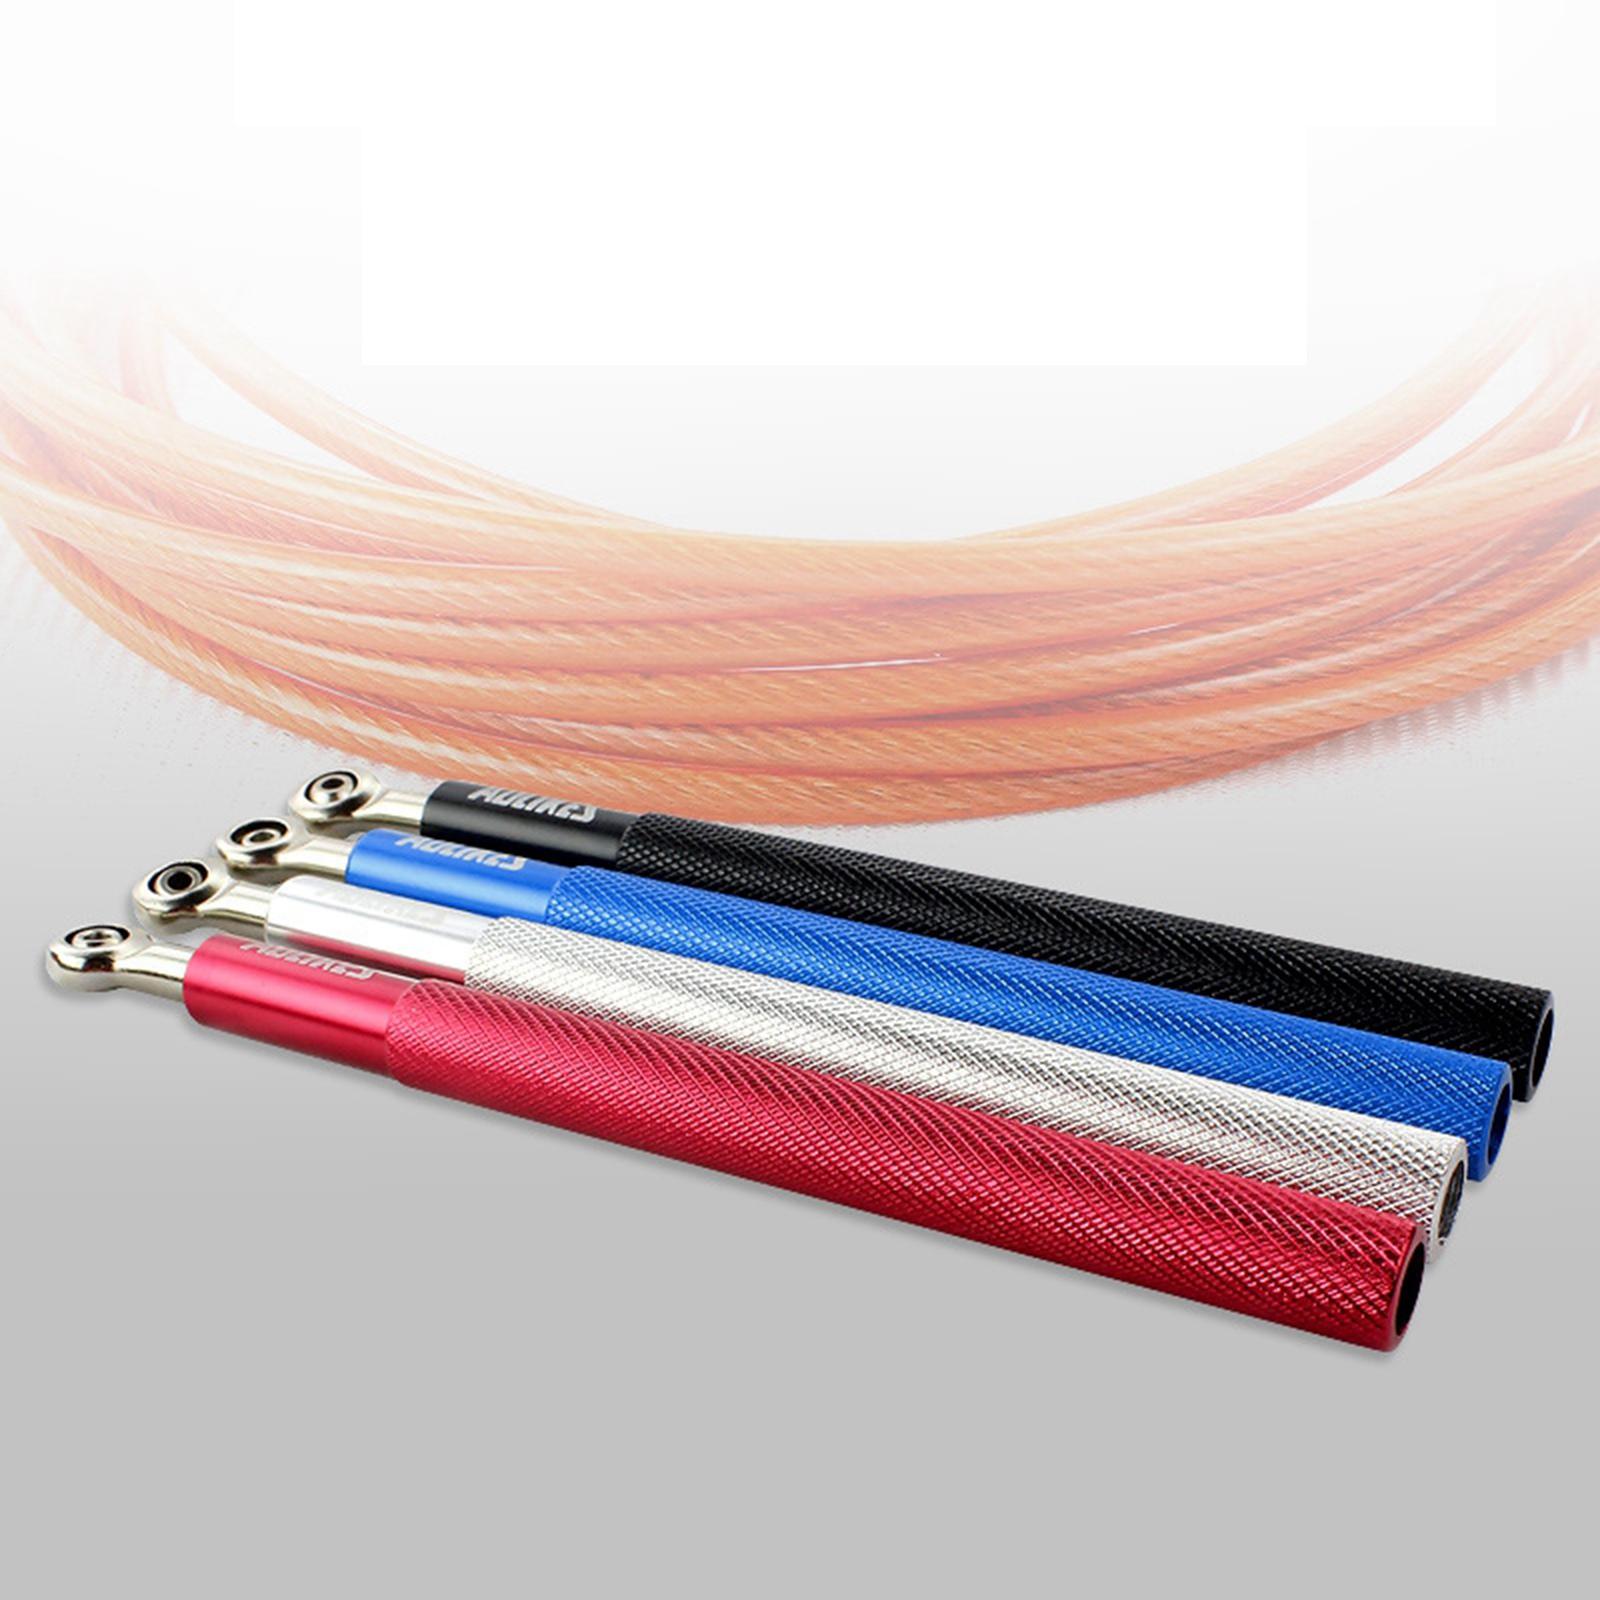 Skipping Rope Jumping Rope Speed Jump Rope for Workout Home Exercise Fitness Orange